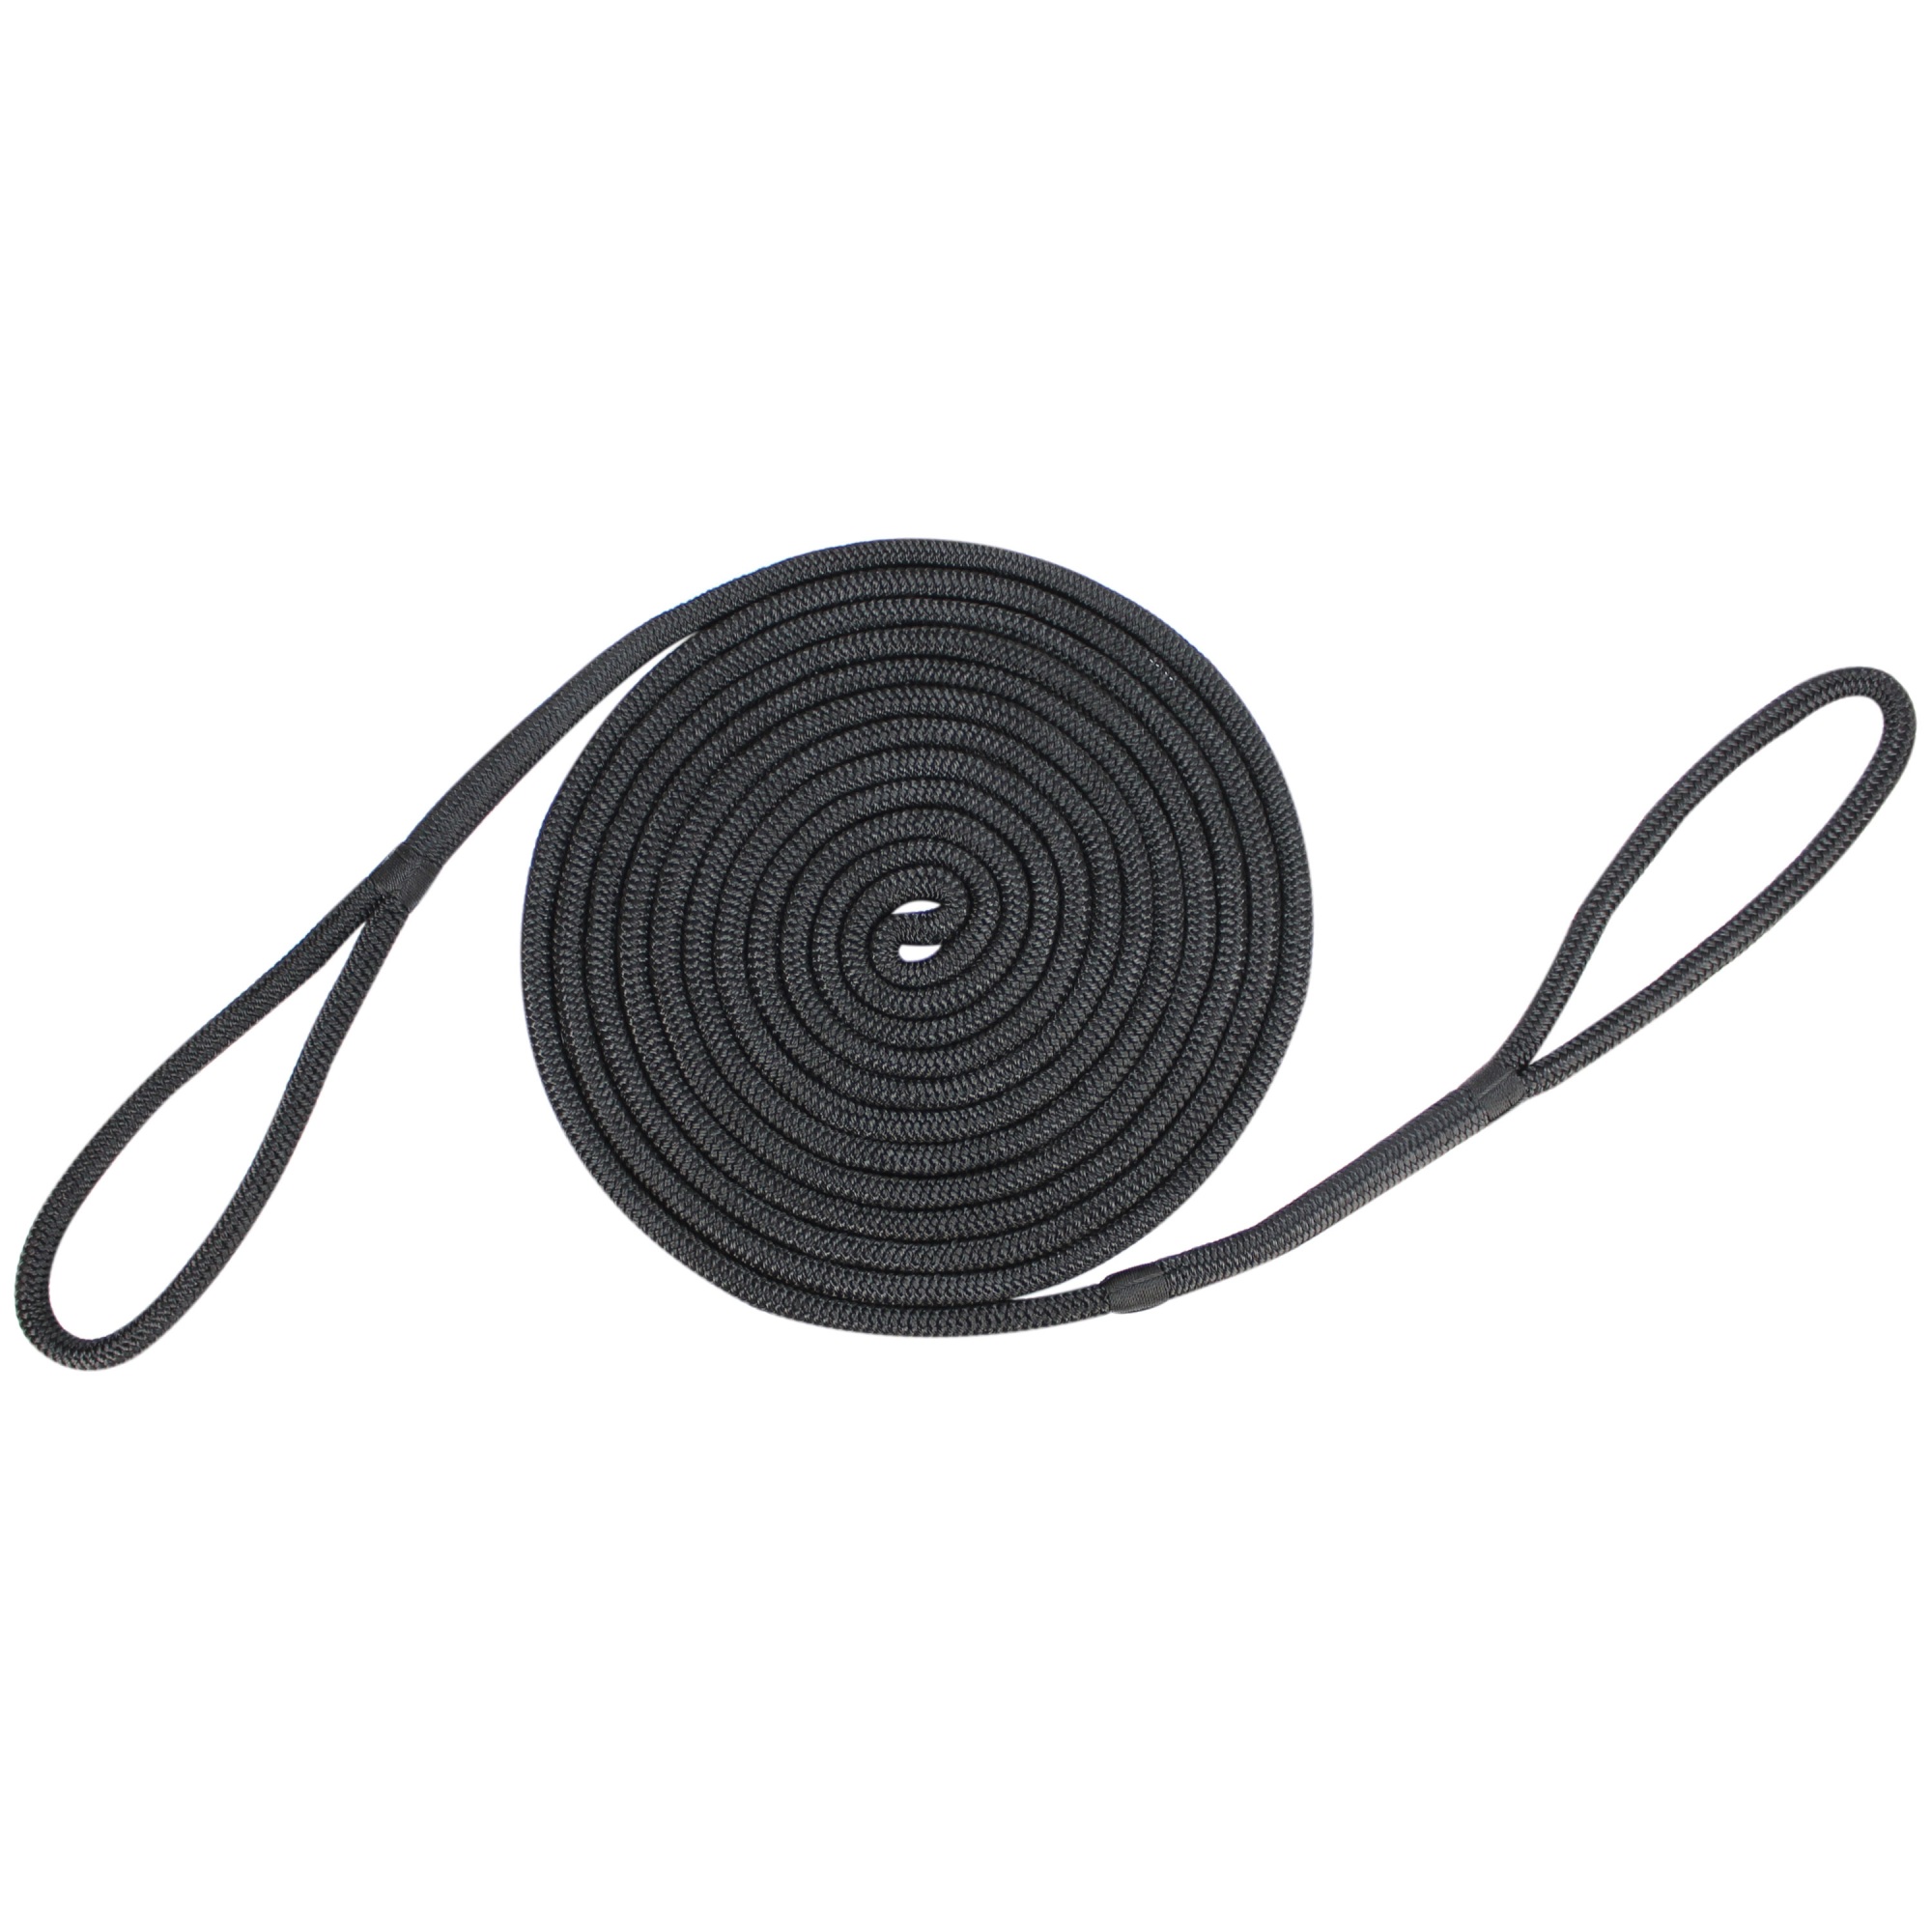 Extreme Max 3006.2394 BoatTector Premium Double Looped Nylon Dock Line for Mooring Buoys - 5/8" x 40, Black